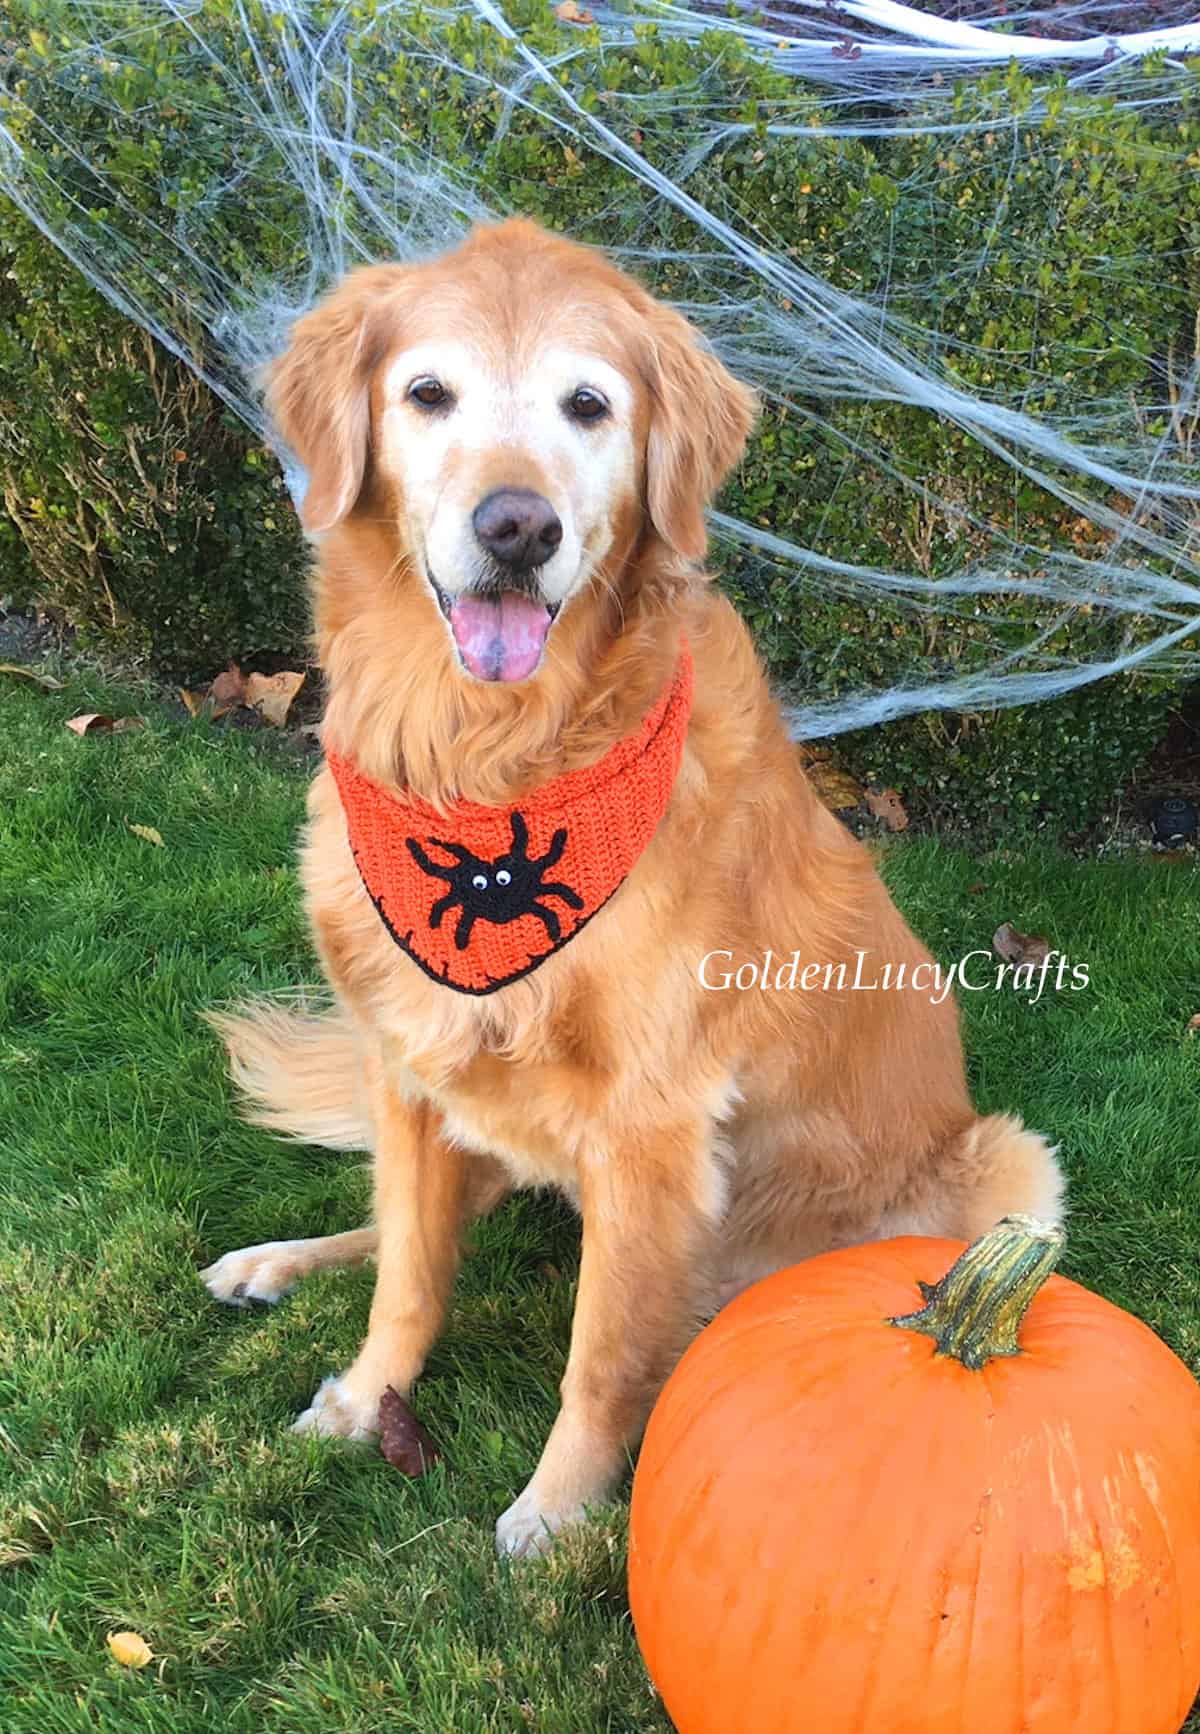 Dog dressed up in Halloween bandana, pumpkin in front of him.